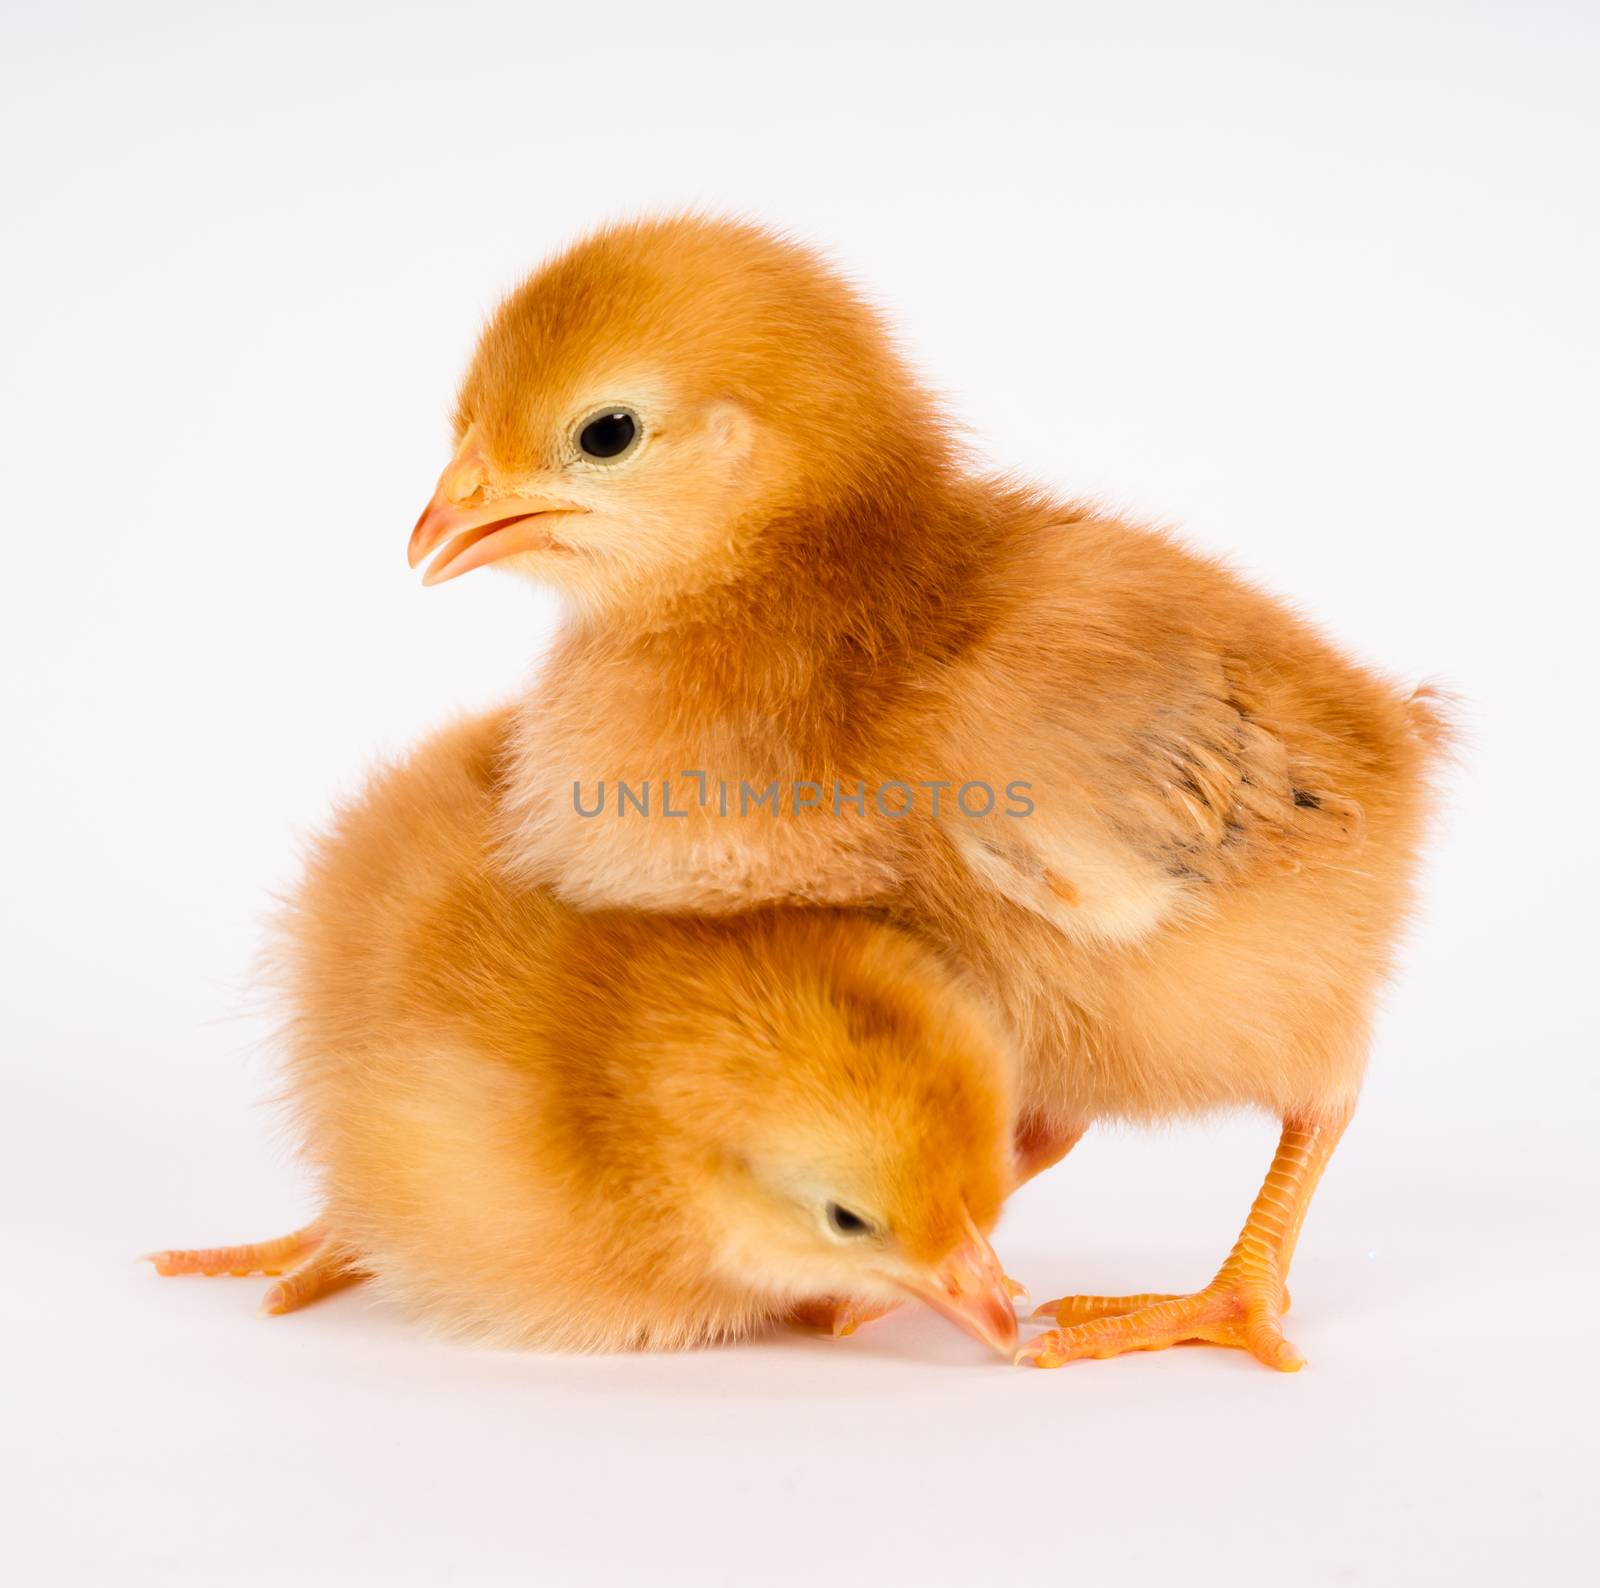 A Rhode Island Red Baby Chicken Stands with Sibling Alone Just a Few Days Old